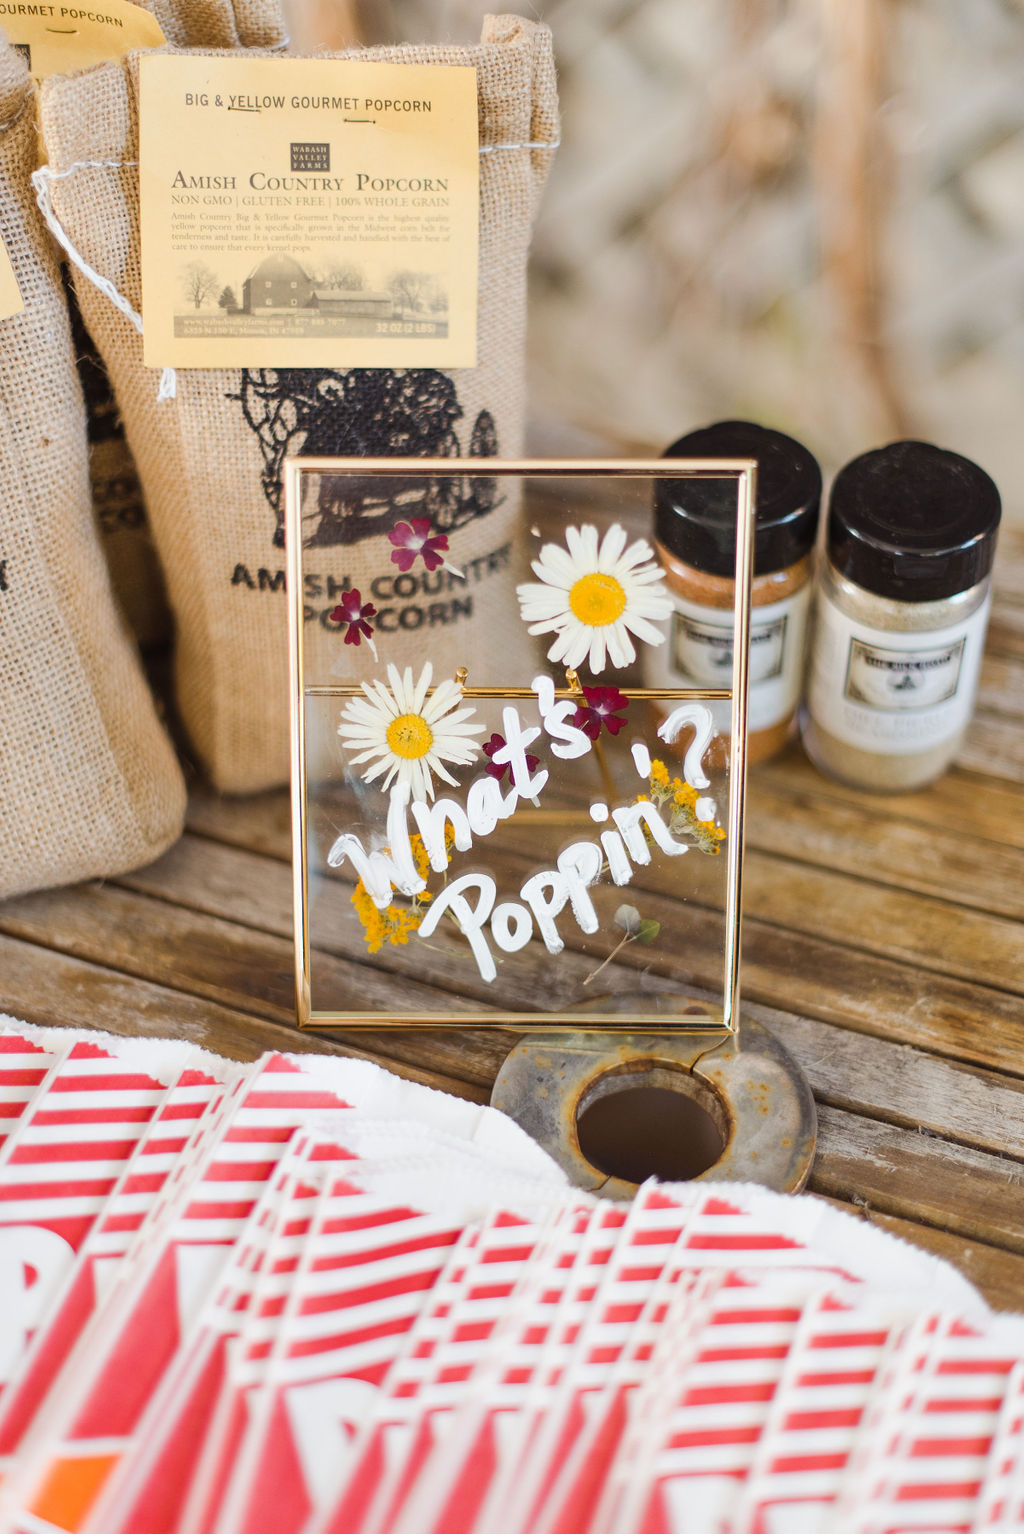 A wedding sign featuring popcorn with wildflower designs